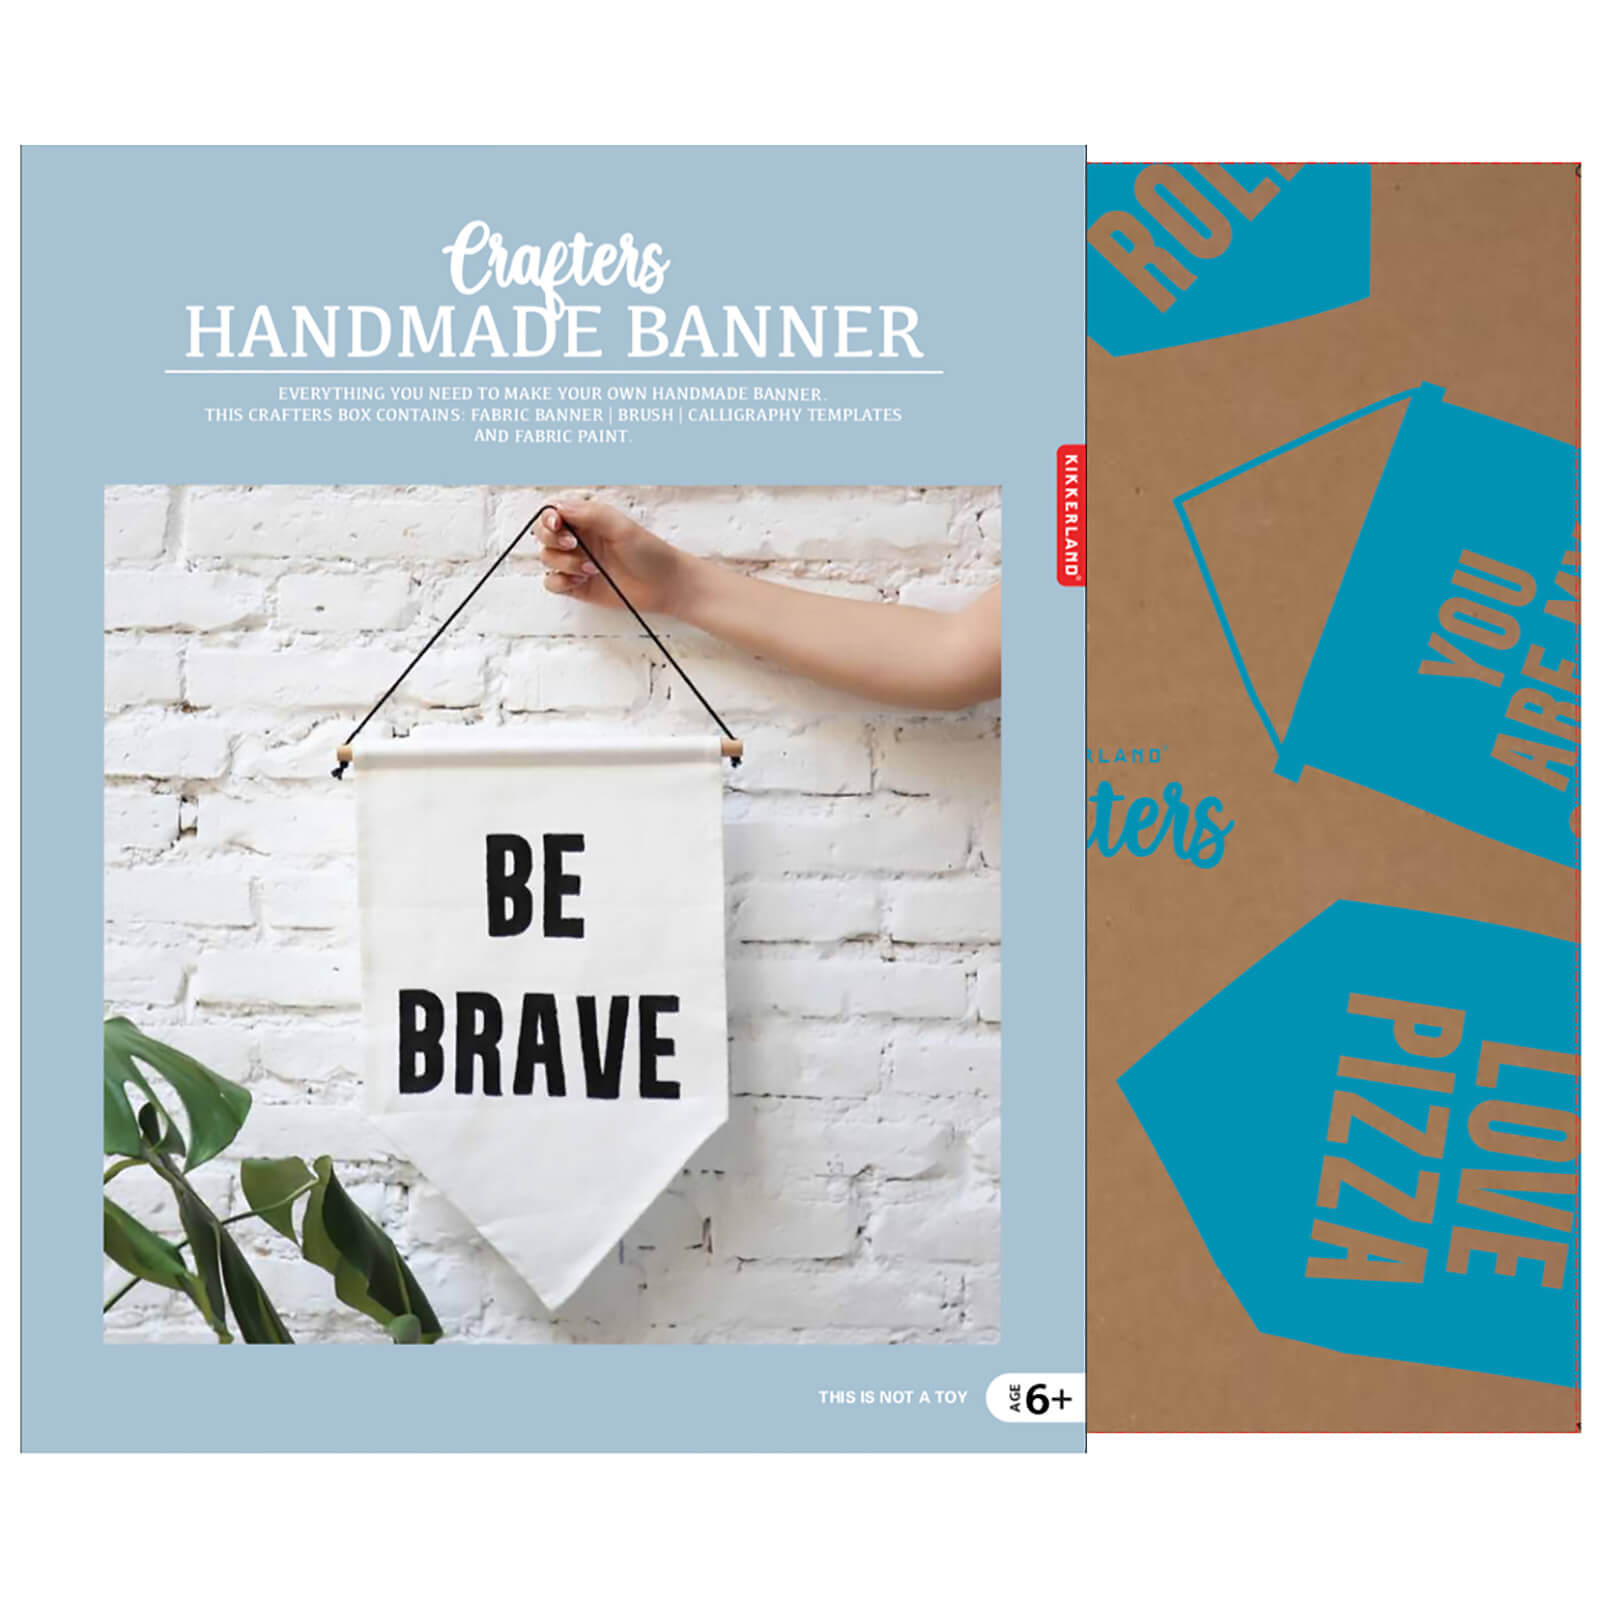 Image of Crafters Handmade Banner Kit